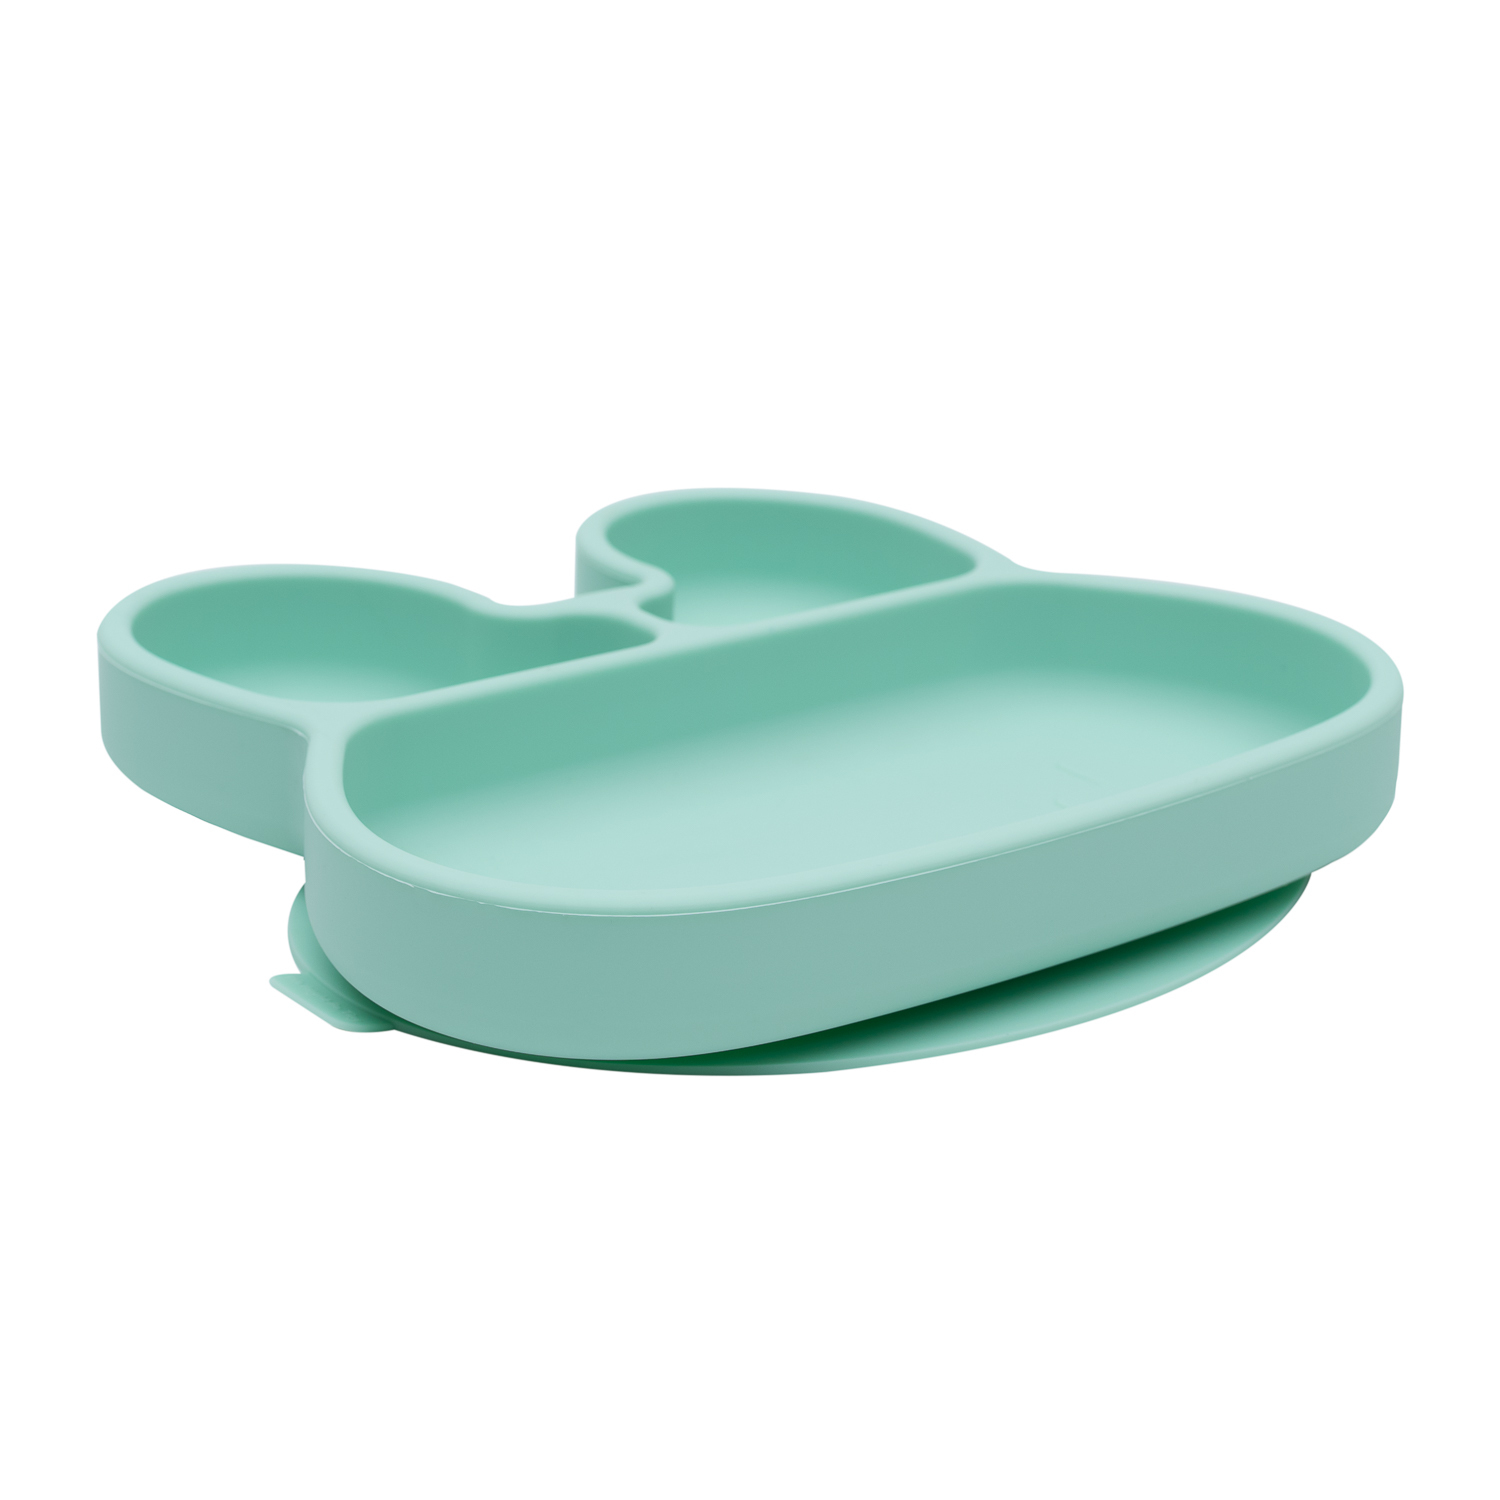 Bunny Stickie Plate - Mint Angled (low res).JPG